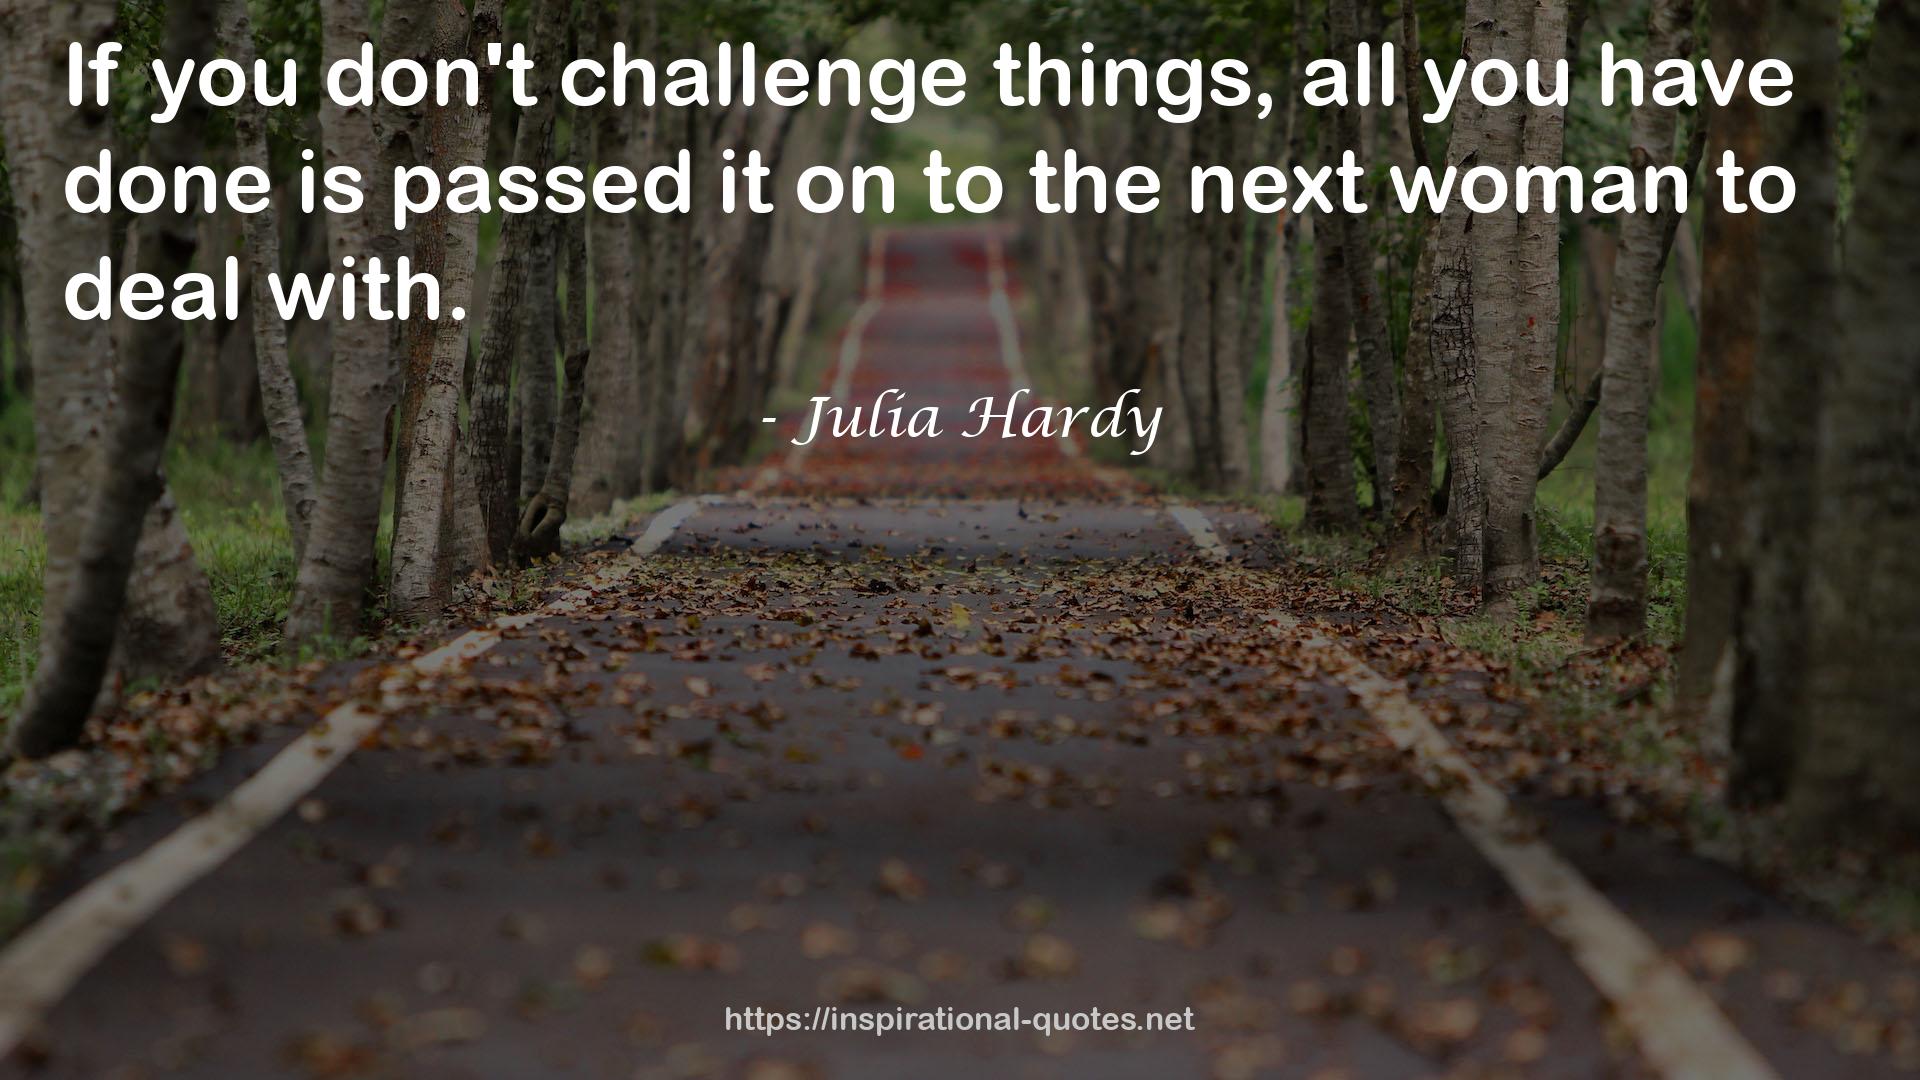 Julia Hardy QUOTES